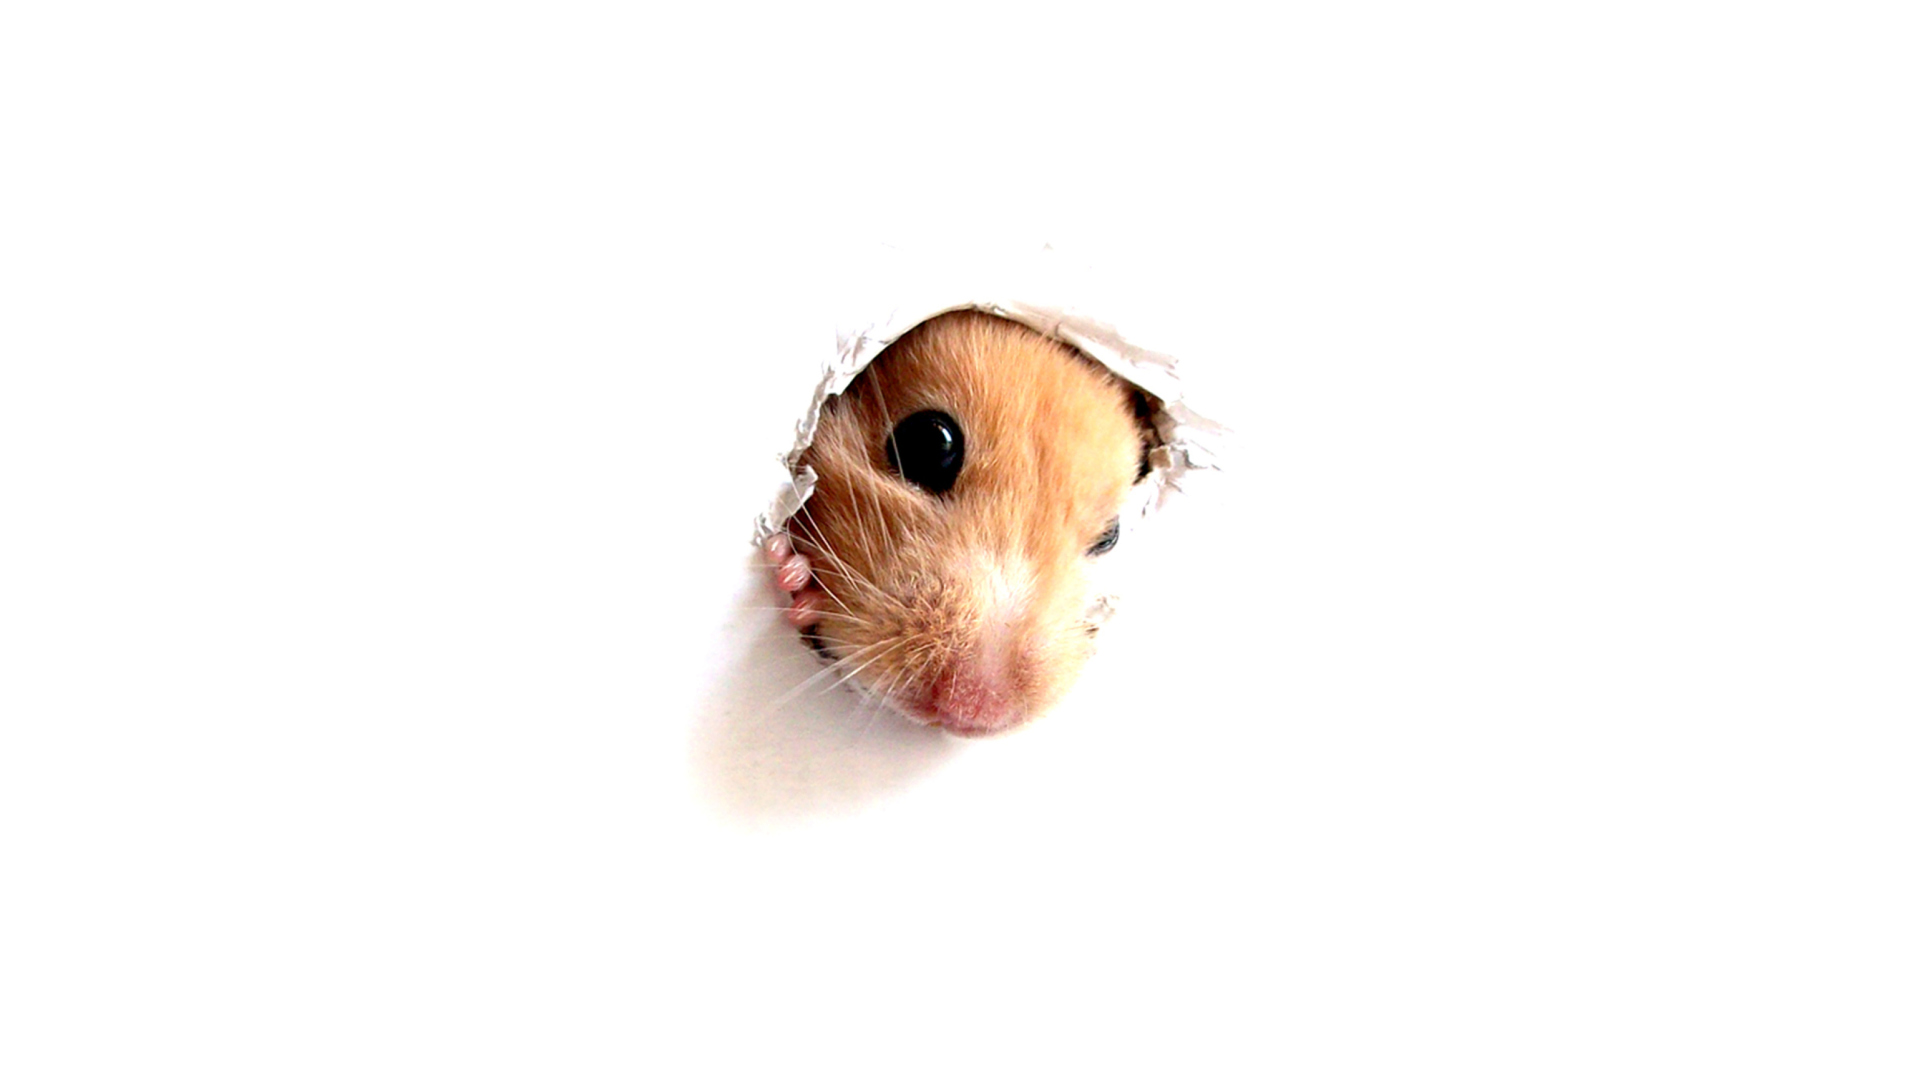 Hamster In Hole On Your Screen wallpaper 1920x1080